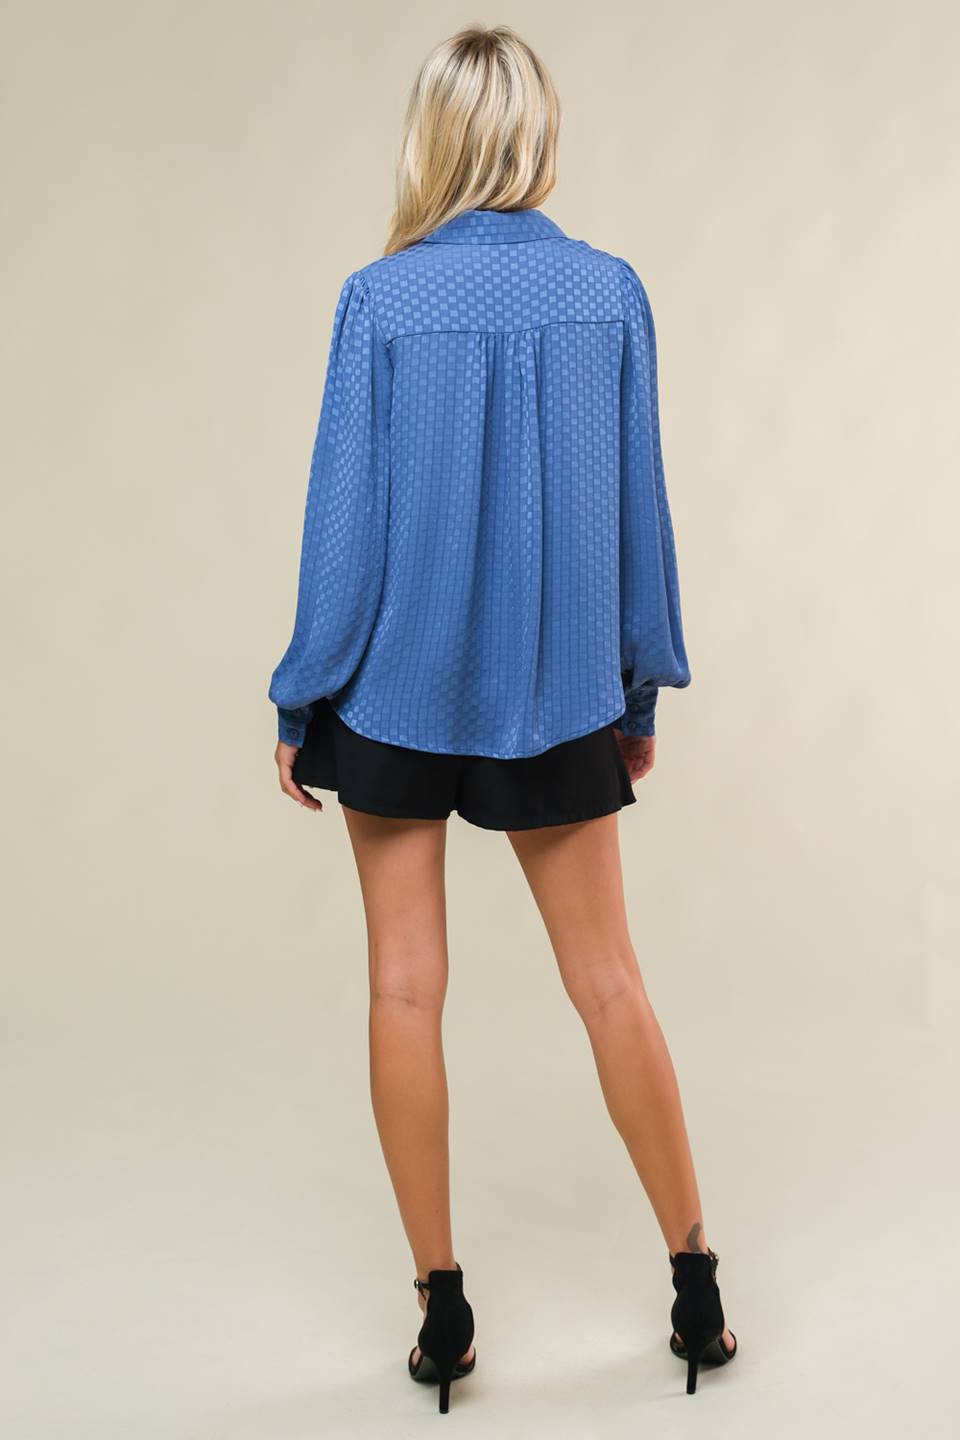 THINK OF ME WOVEN TOP